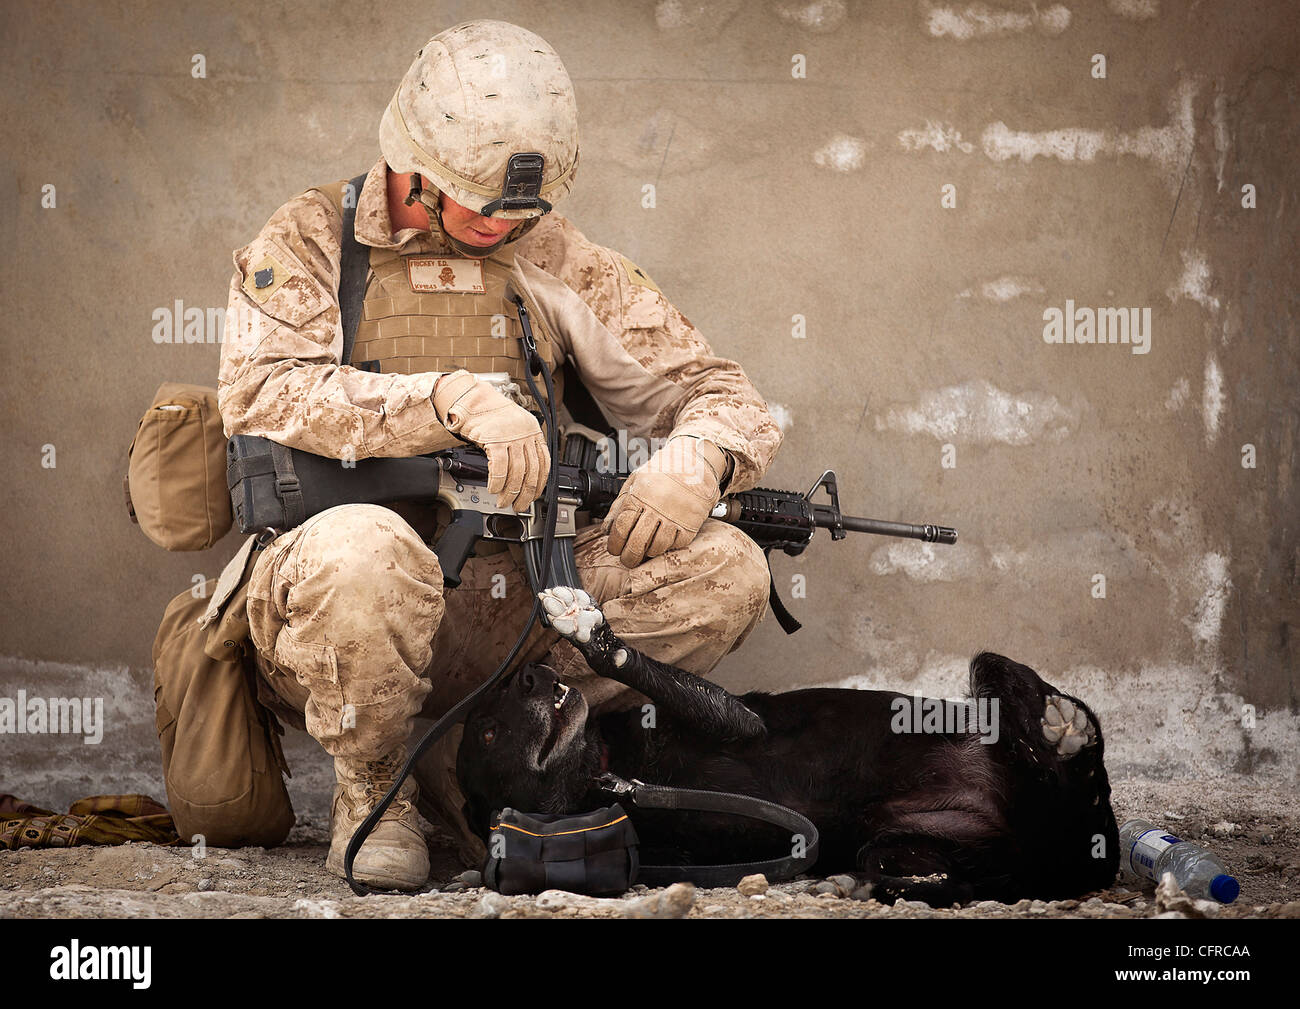 US Marine Lance Cpl. Evan Frickey, a 21-year-old improvised explosive device detection dog handler plays with Cookie, an improvised explosive device detection dog, while providing security on the perimeter of the Safar School compound March 18, 2012 in Safar, Afghanistan. Stock Photo